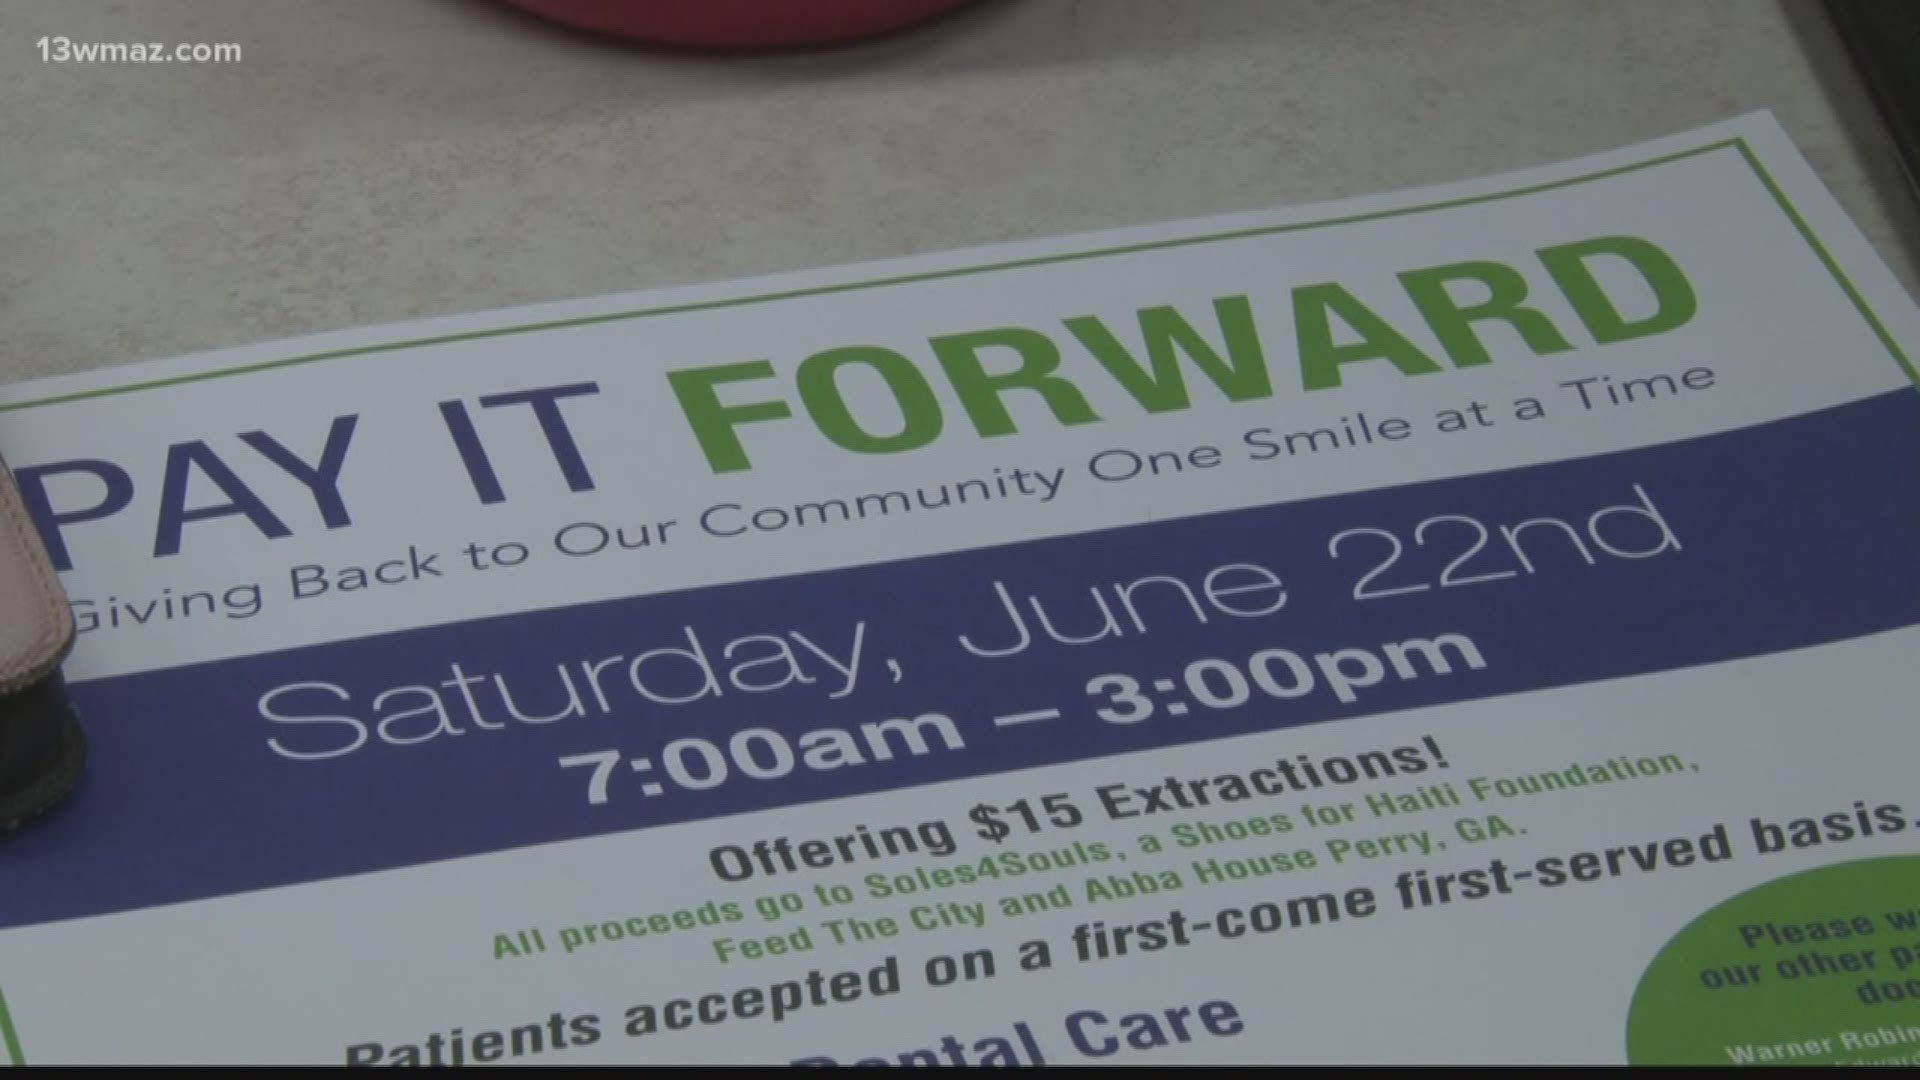 Byron Family Dental Care is hosting a 'Pay It Forward Day' this Saturday. The event will provide dental extractions to anyone who needs them for only $15.